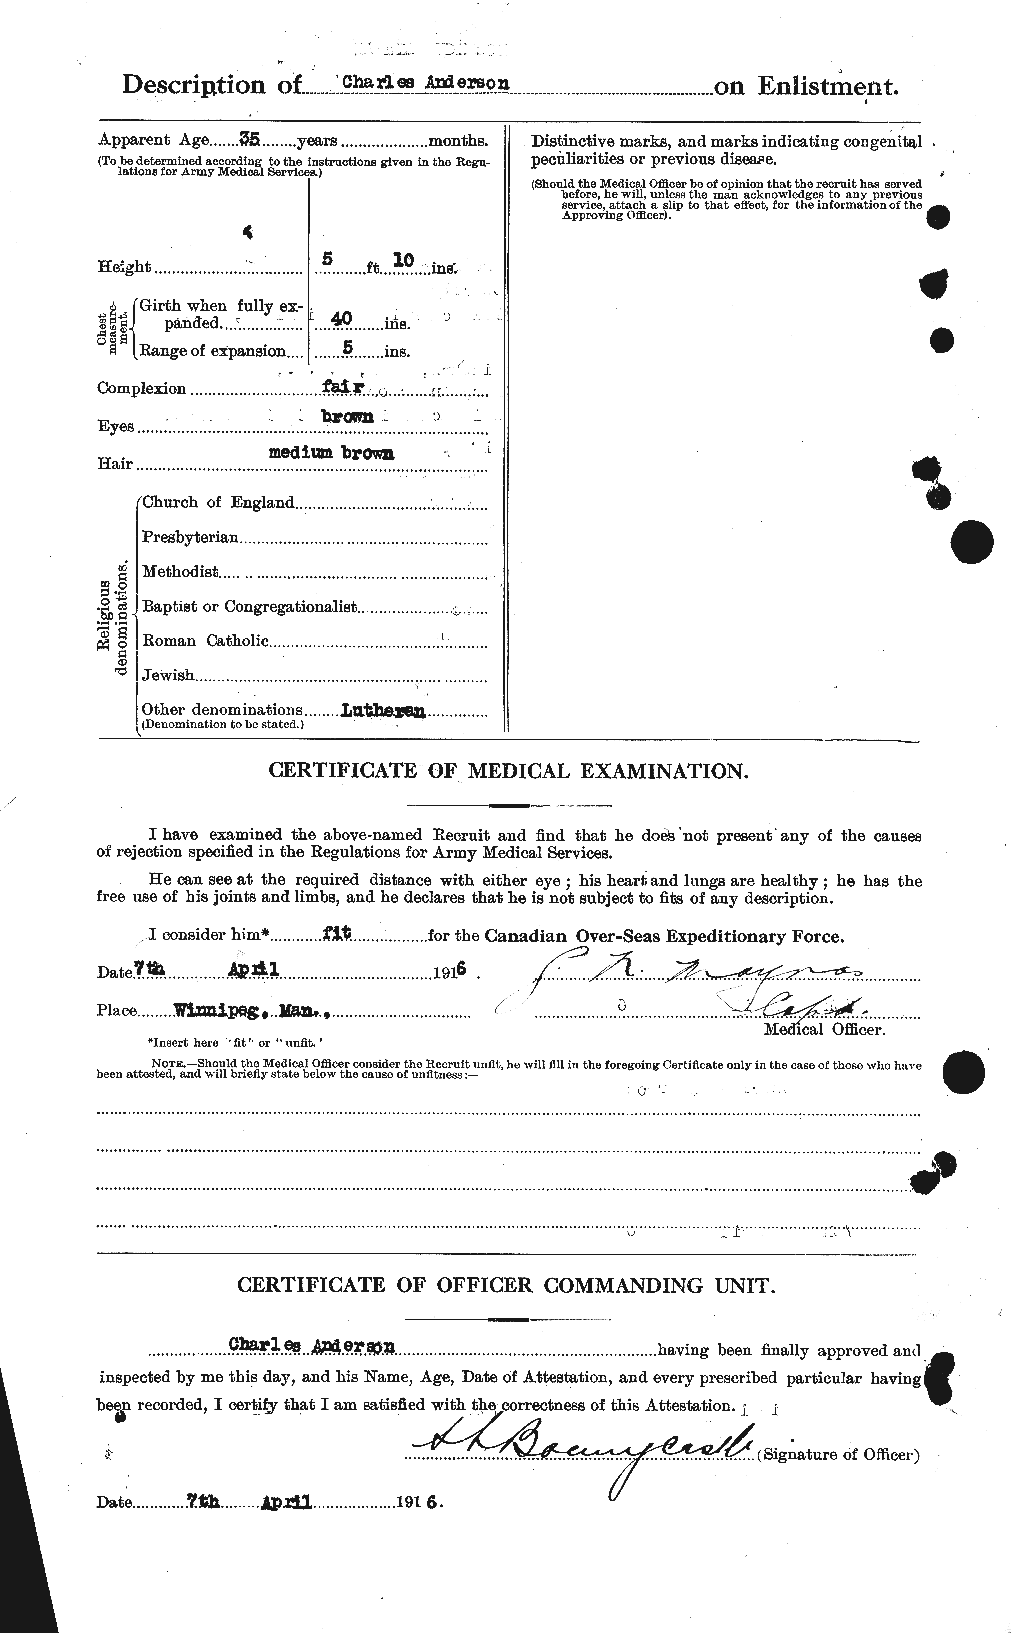 Personnel Records of the First World War - CEF 209259b